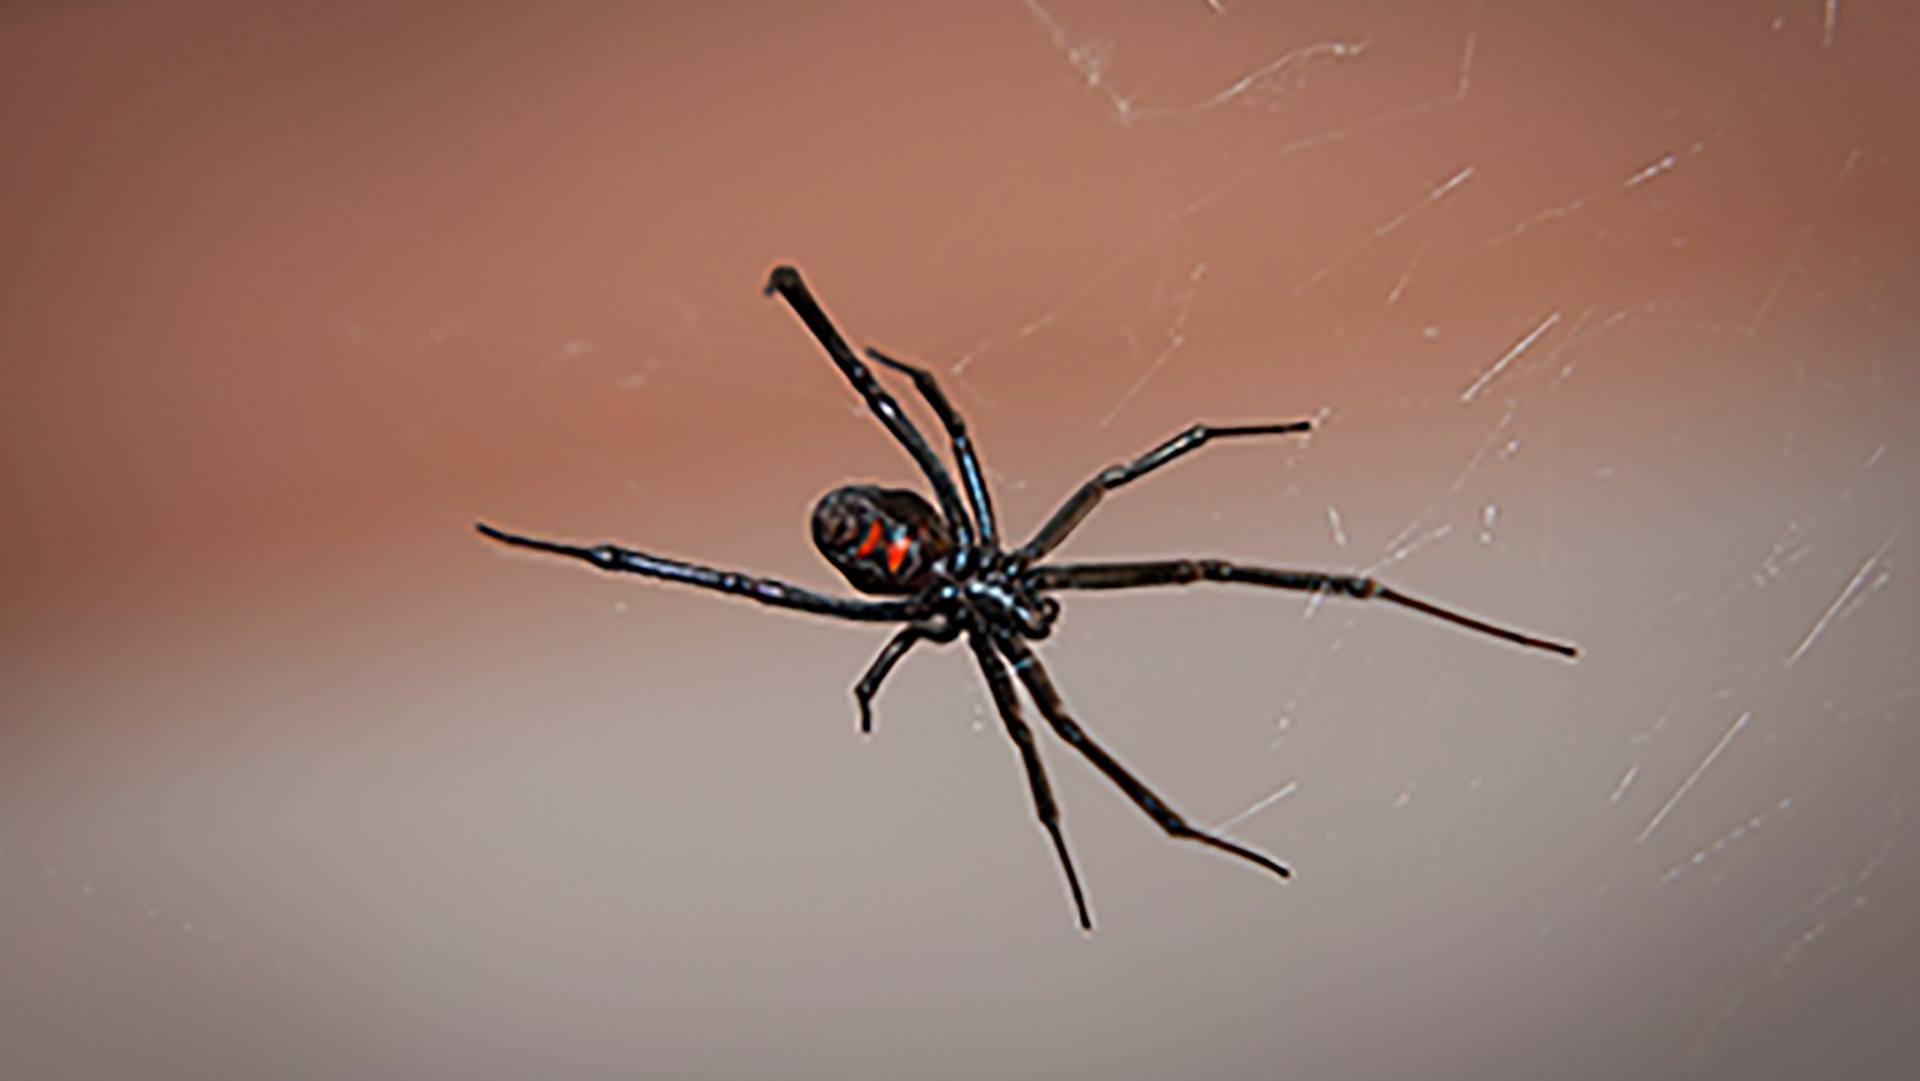 Black widow spiders are venomous and can be found within the service area of Sure Green Lawn & Tree Service, Inc..